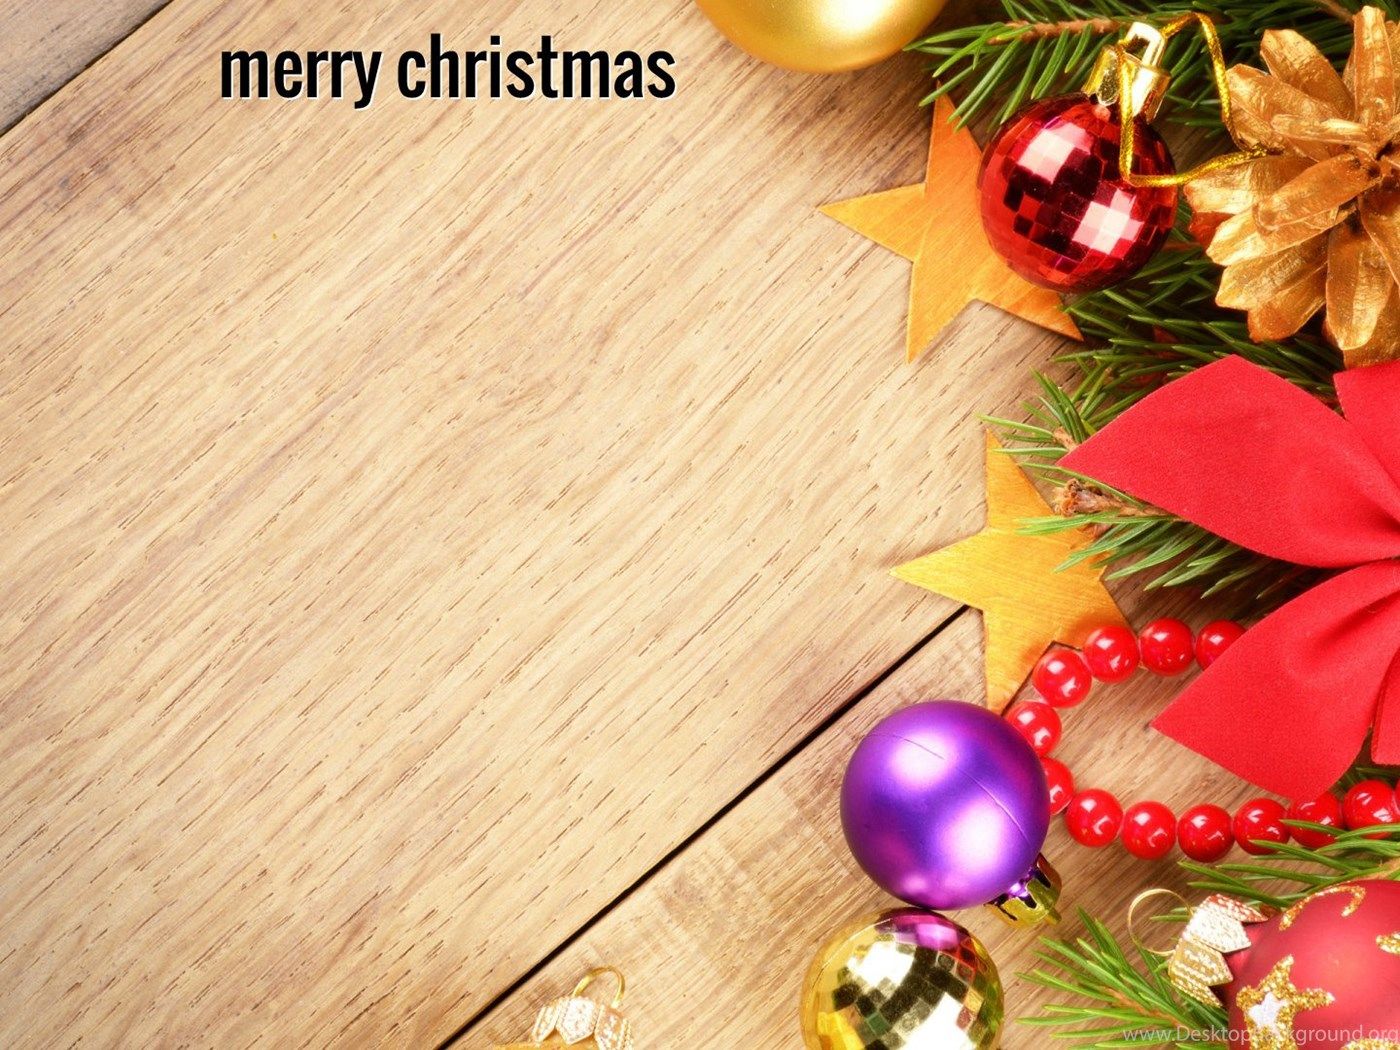 Merry Christmas Wallpaper “Share Your Feelings Or Show Your Love. Desktop Background